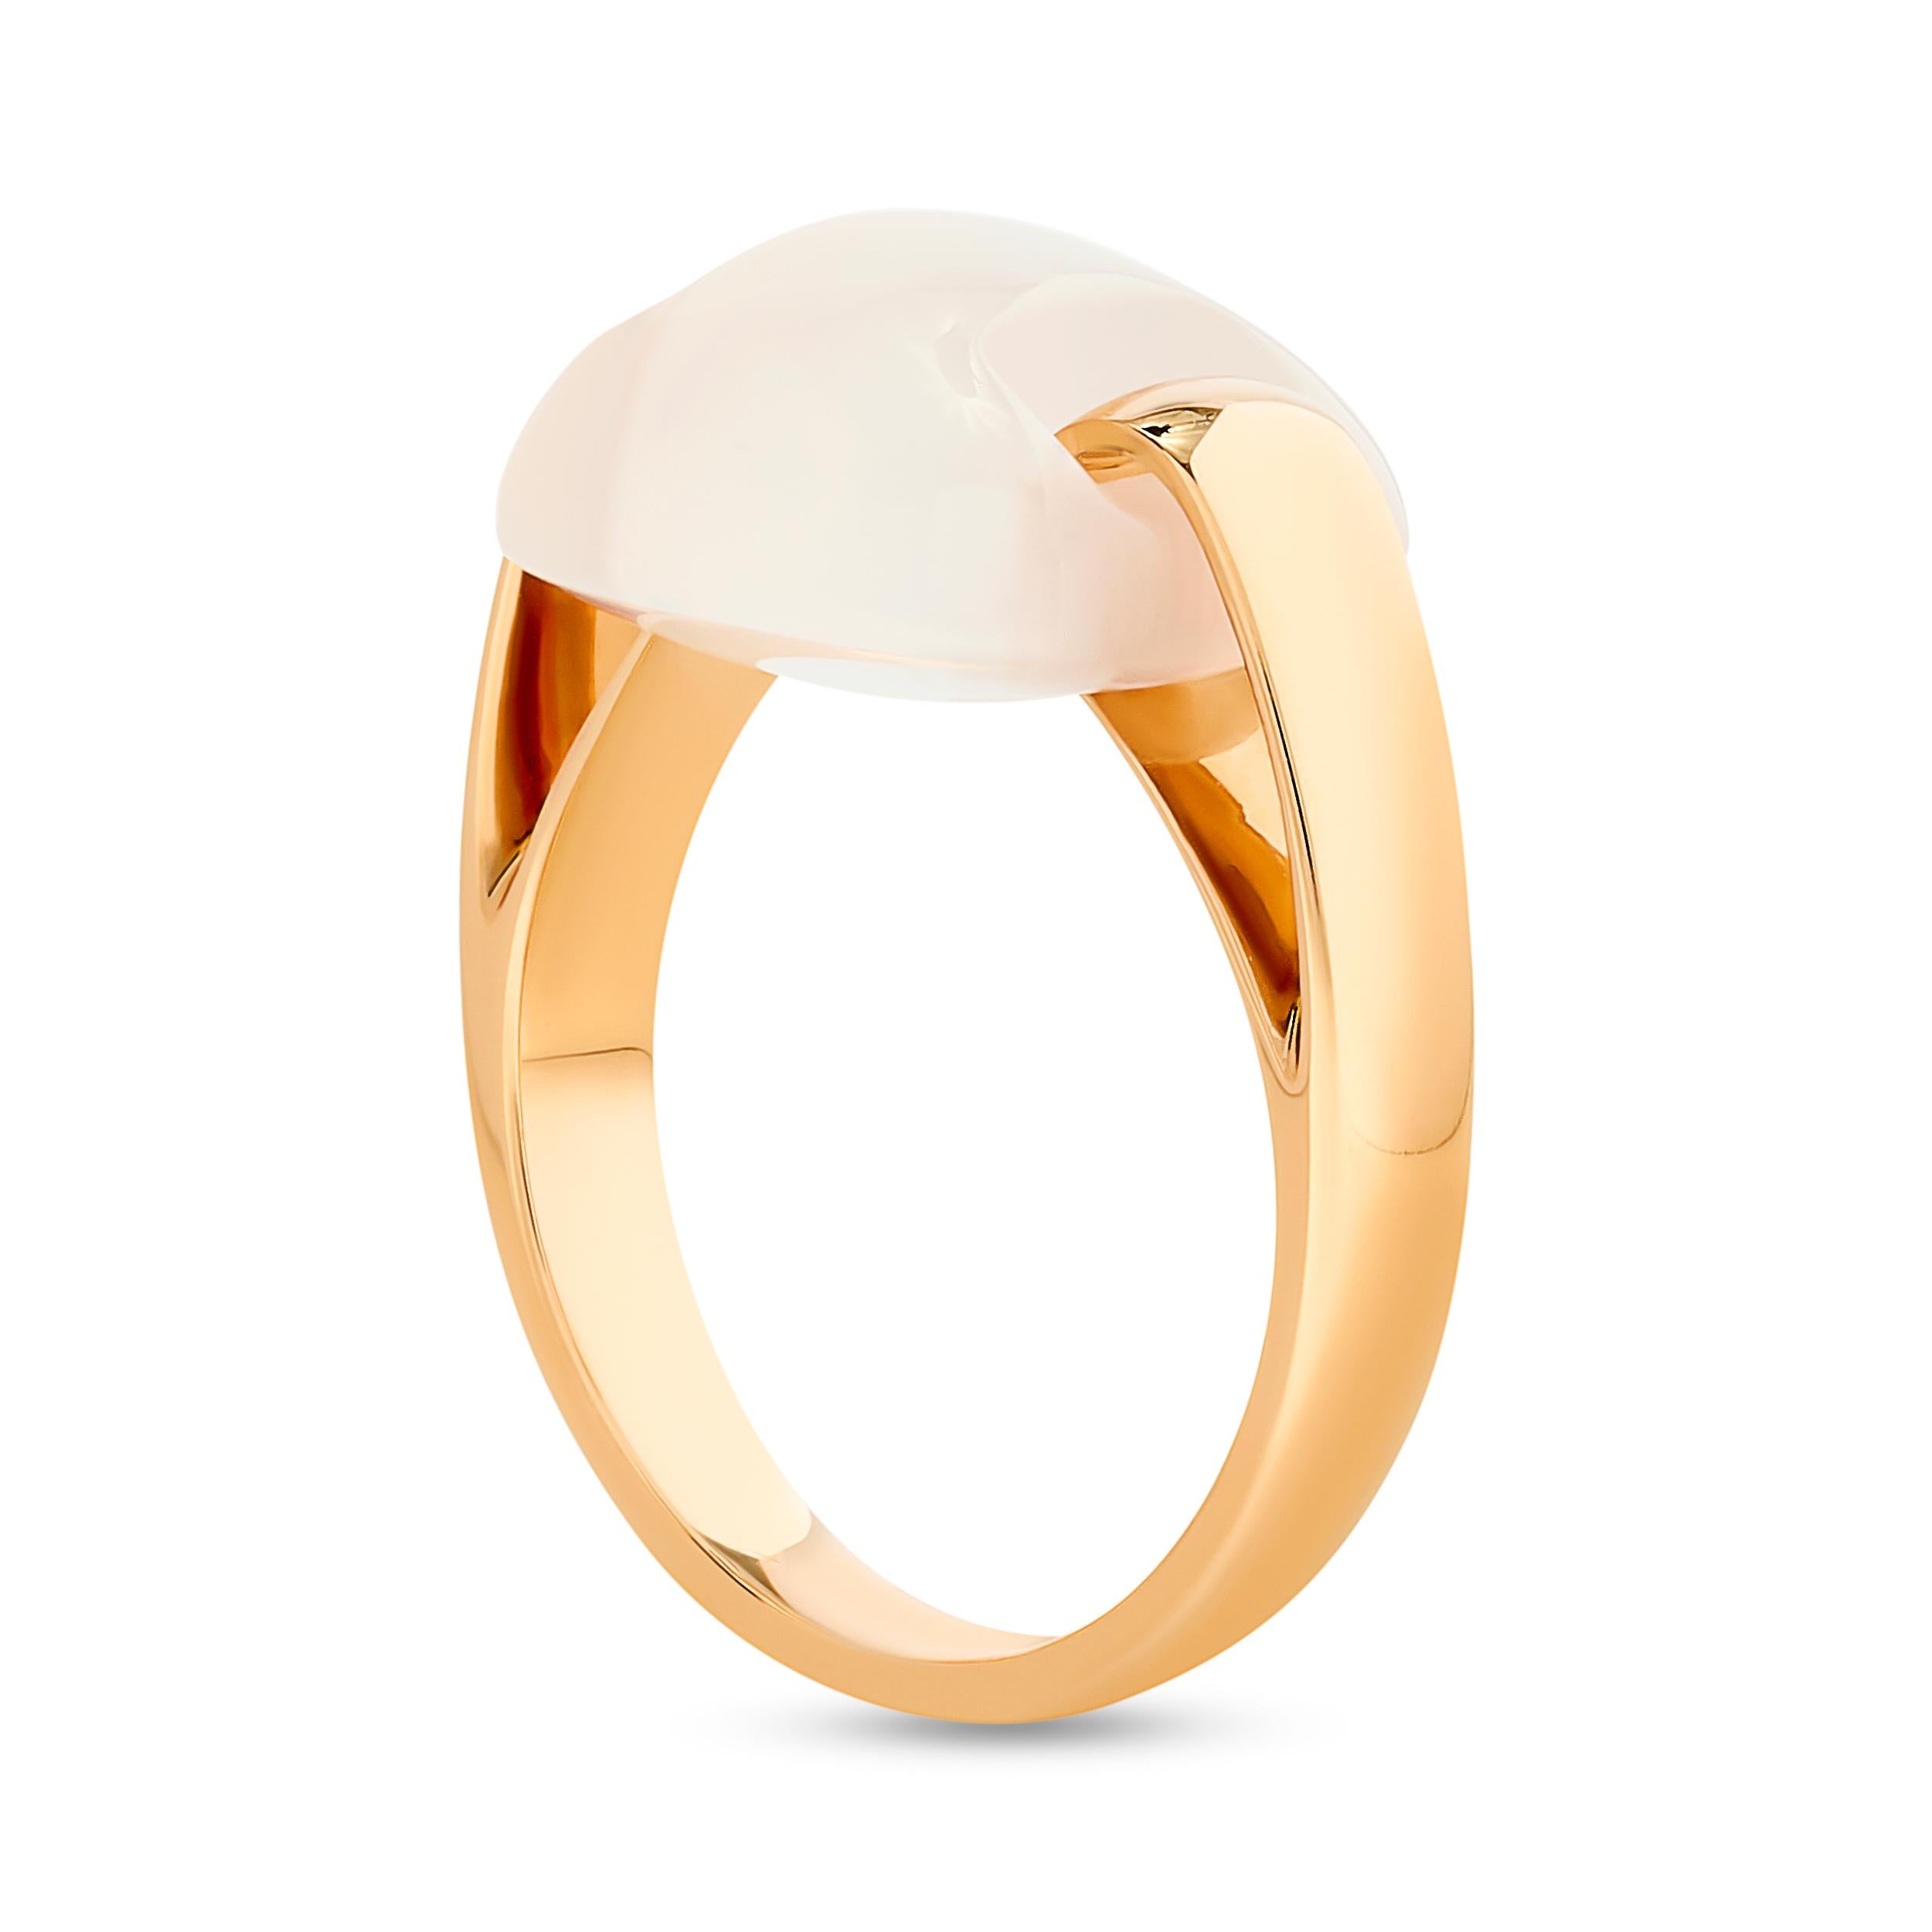 Crafted from luxurious 18k gold, the band is sleek and polished, showcasing Ferragamo's signature craftsmanship. 
The band interlocks with a clear quartz gemstone.

Ring size US 6.50
Signed with the Ferragamo and 18k stamps.
Ferragamo retail: $2,150